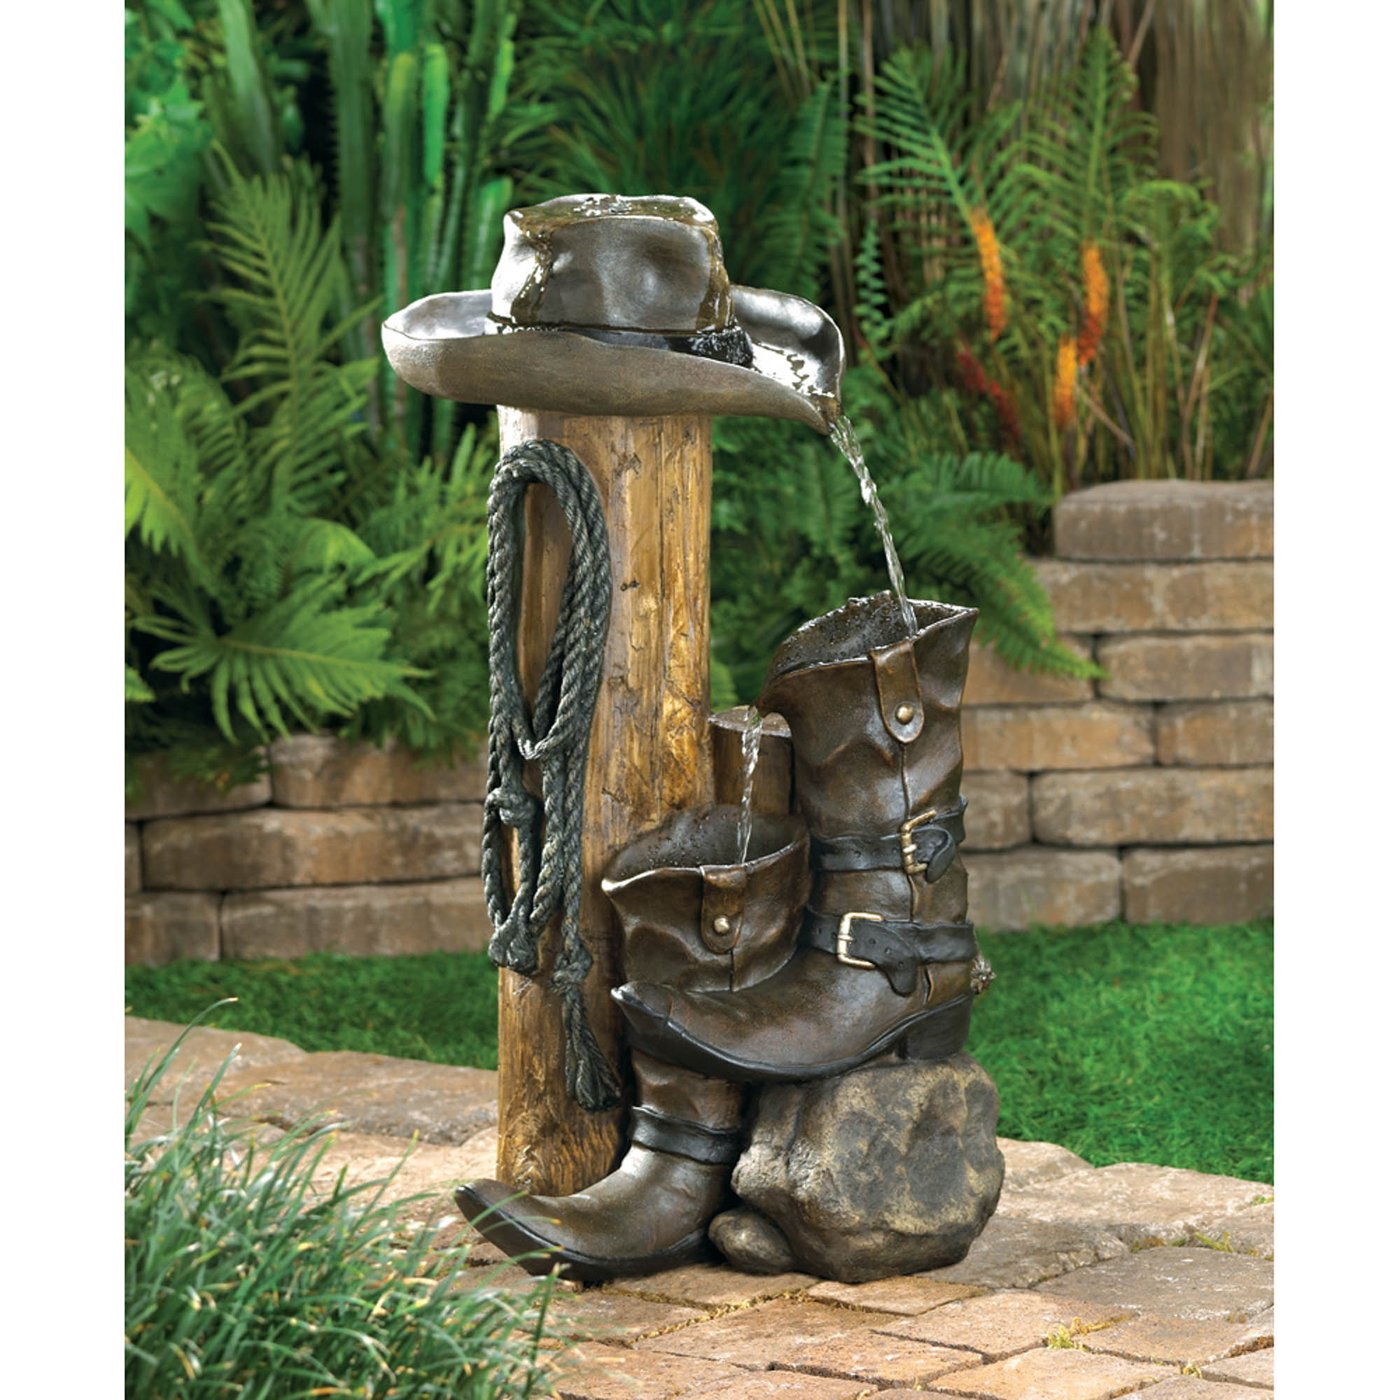 Authentic Cowboy Wild Western Water Fountain (Pump Incl.)